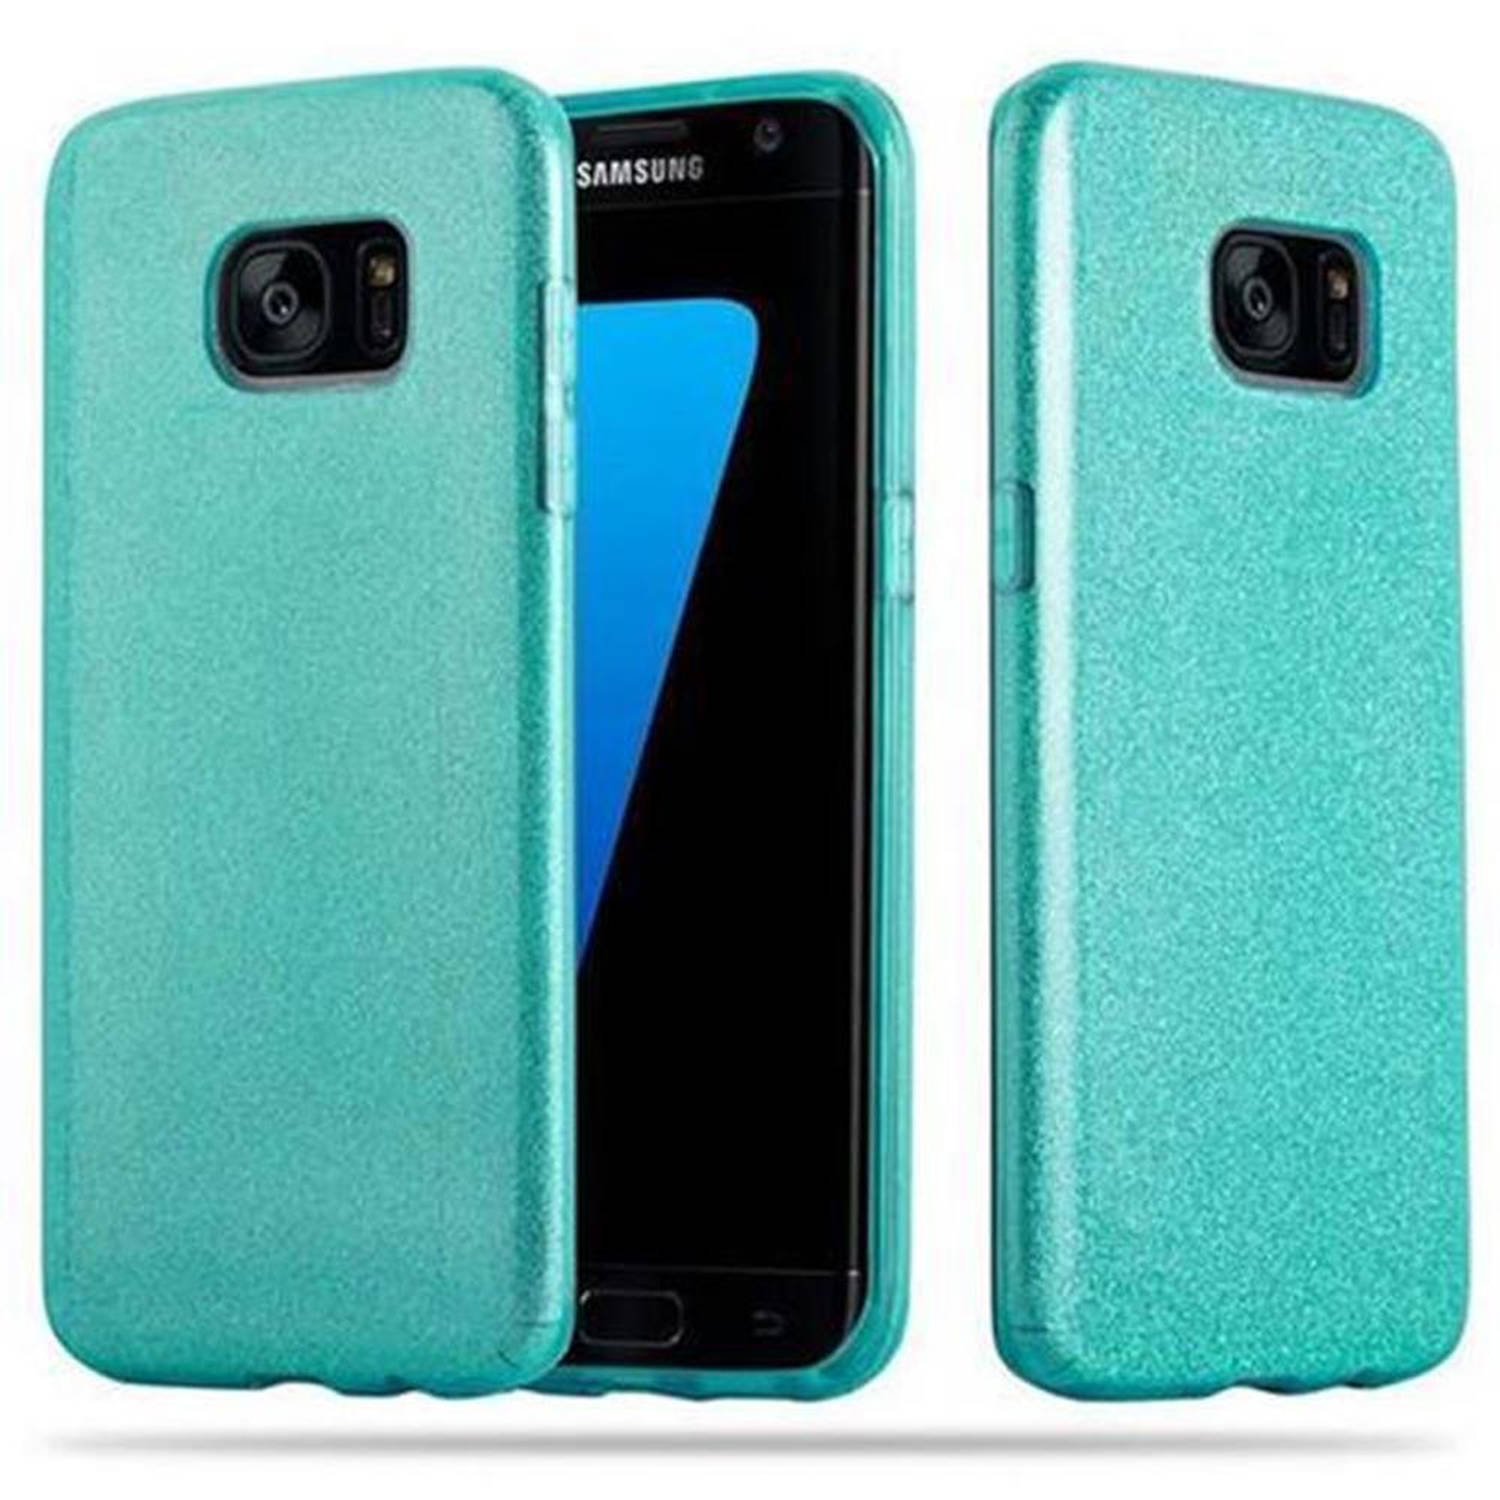 Cadorabo Hoesje geschikt voor Samsung Galaxy S7 EDGE in STAR STOF TURKOOIS TPU Silicone Case Cover b